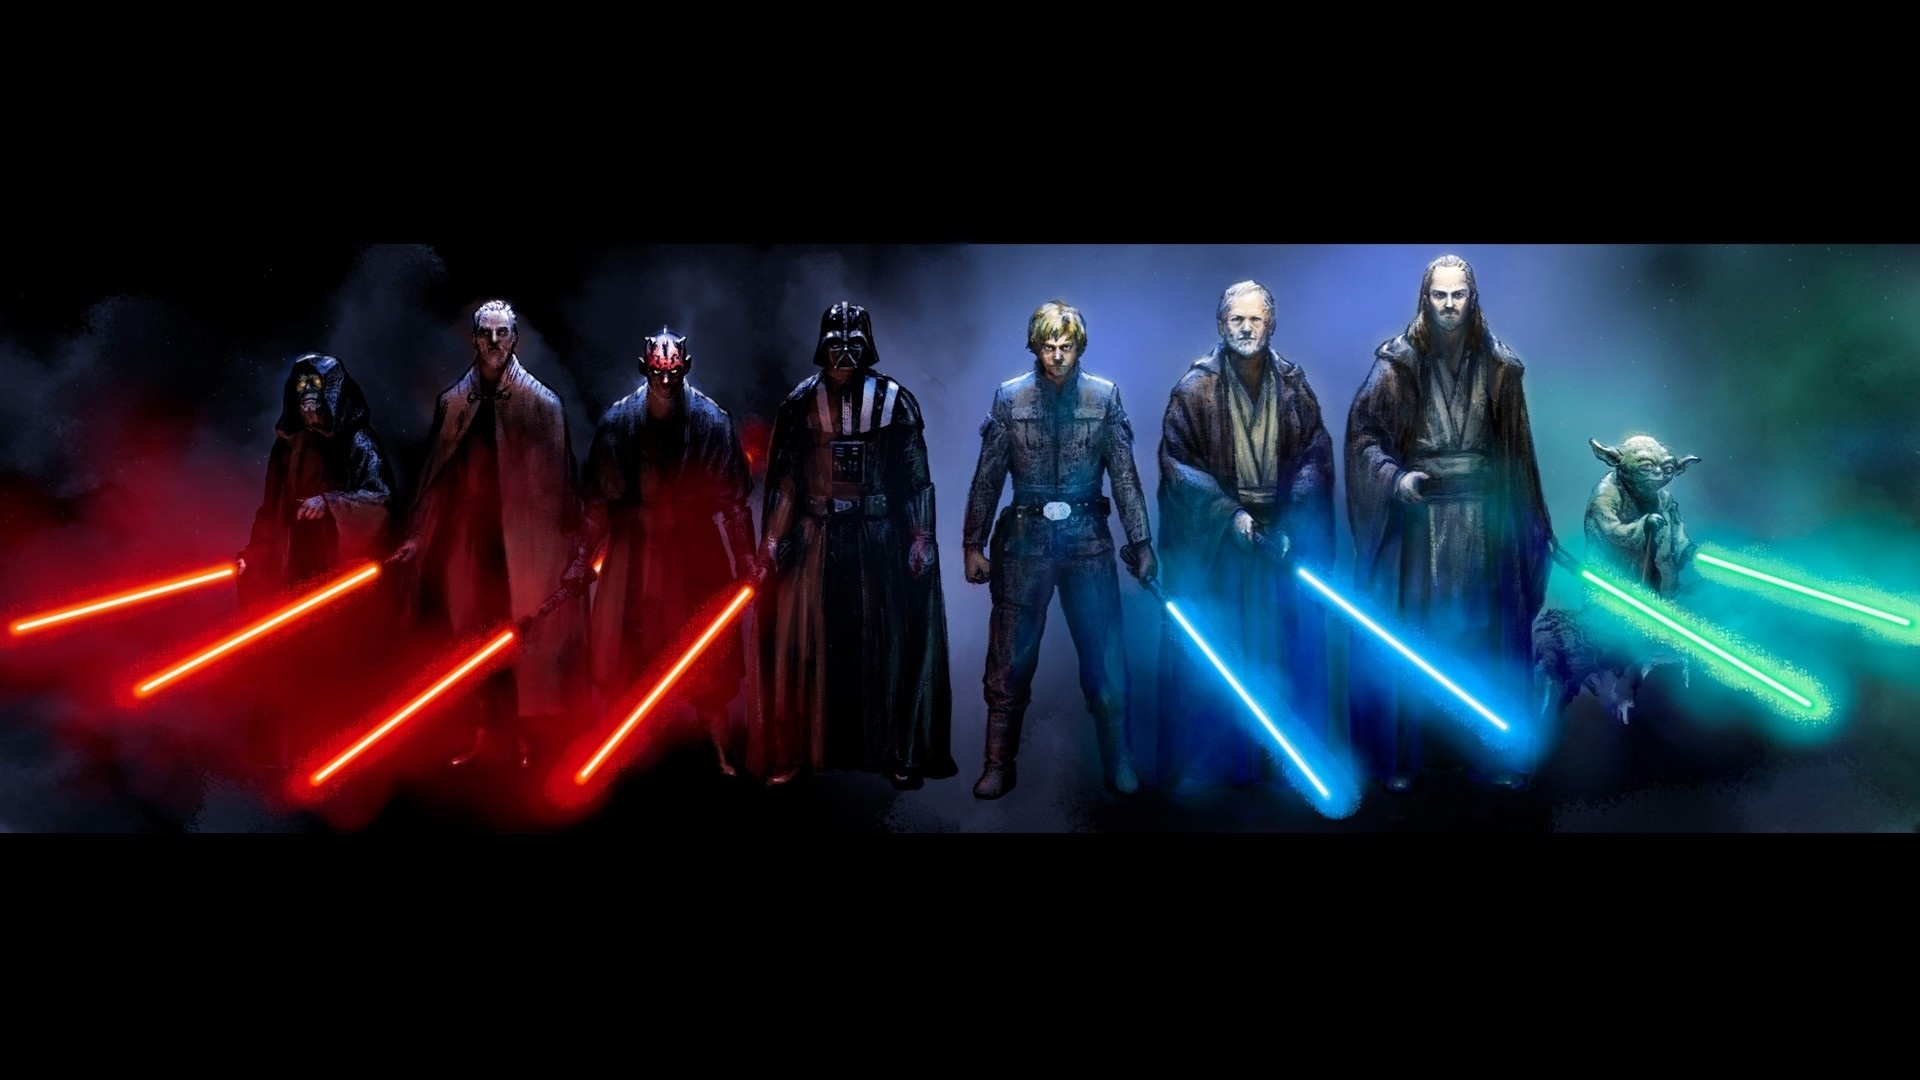 jedi and sith - 50 best star wars wallpapers